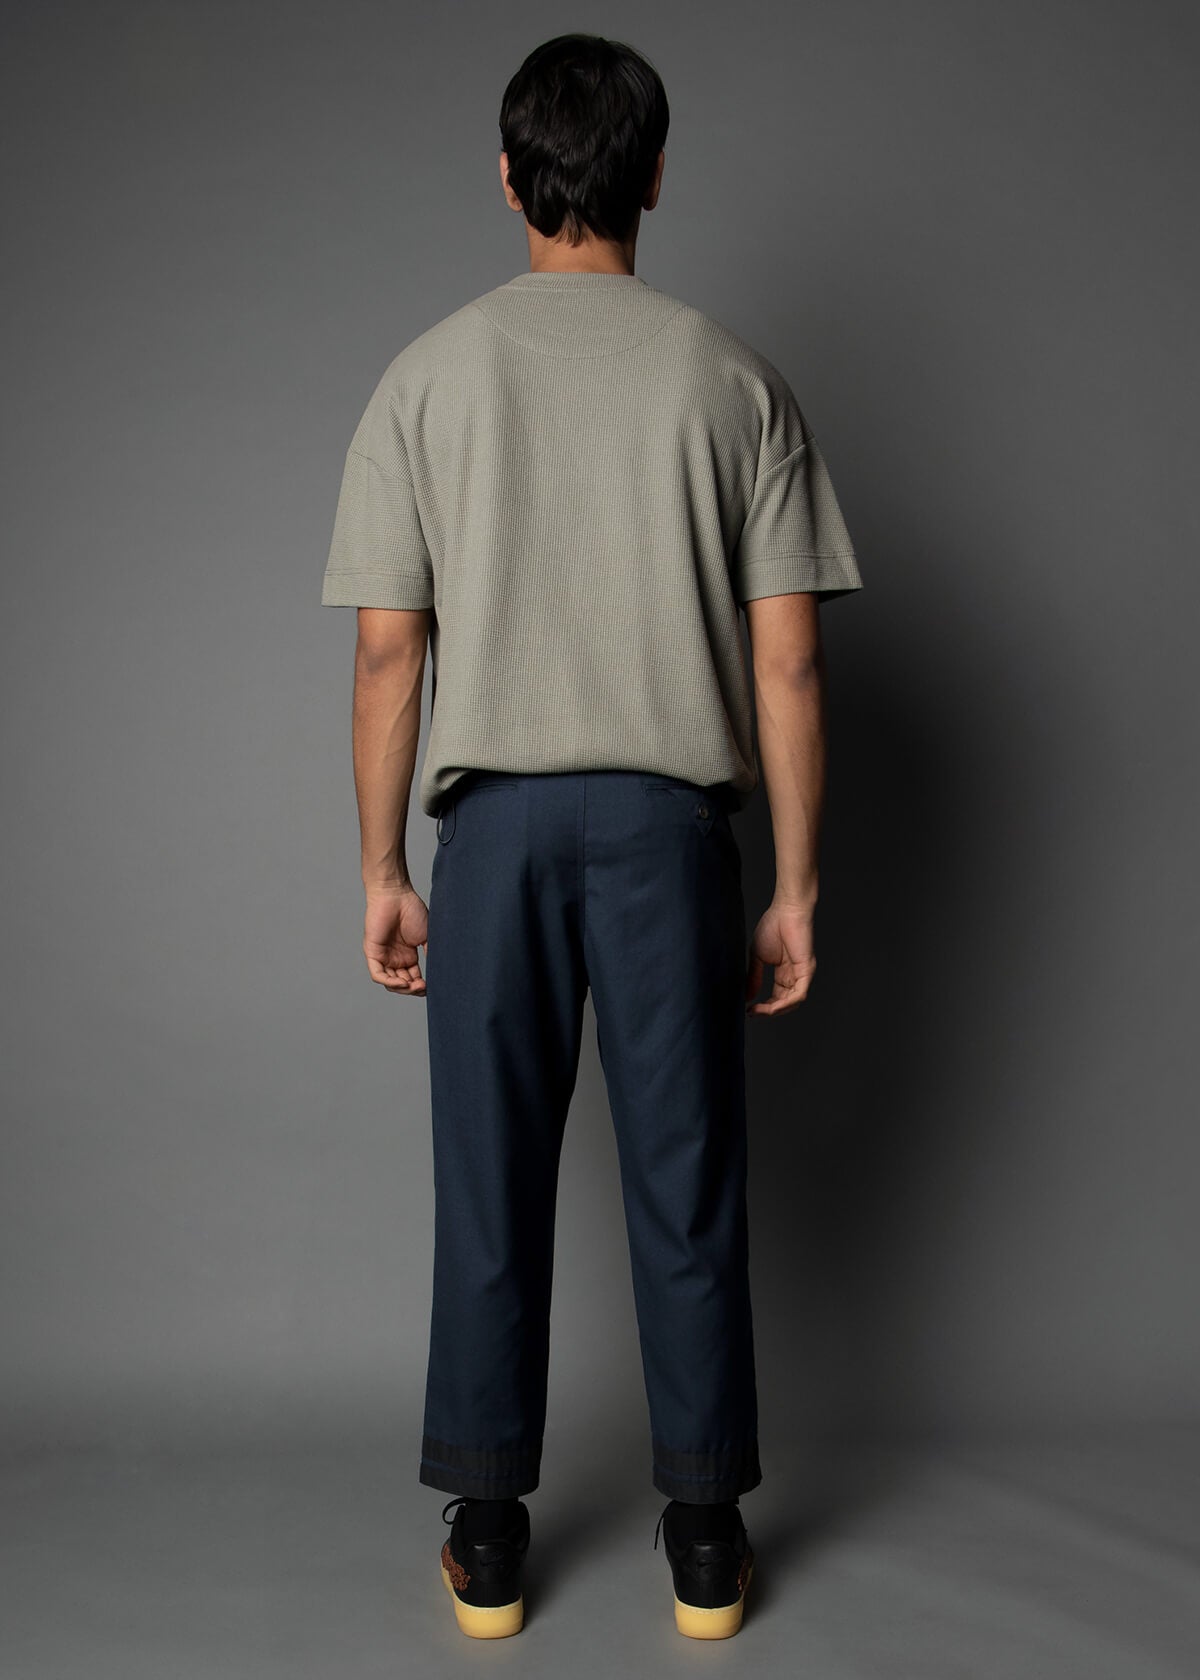 wide, cropped navy blue pants for men